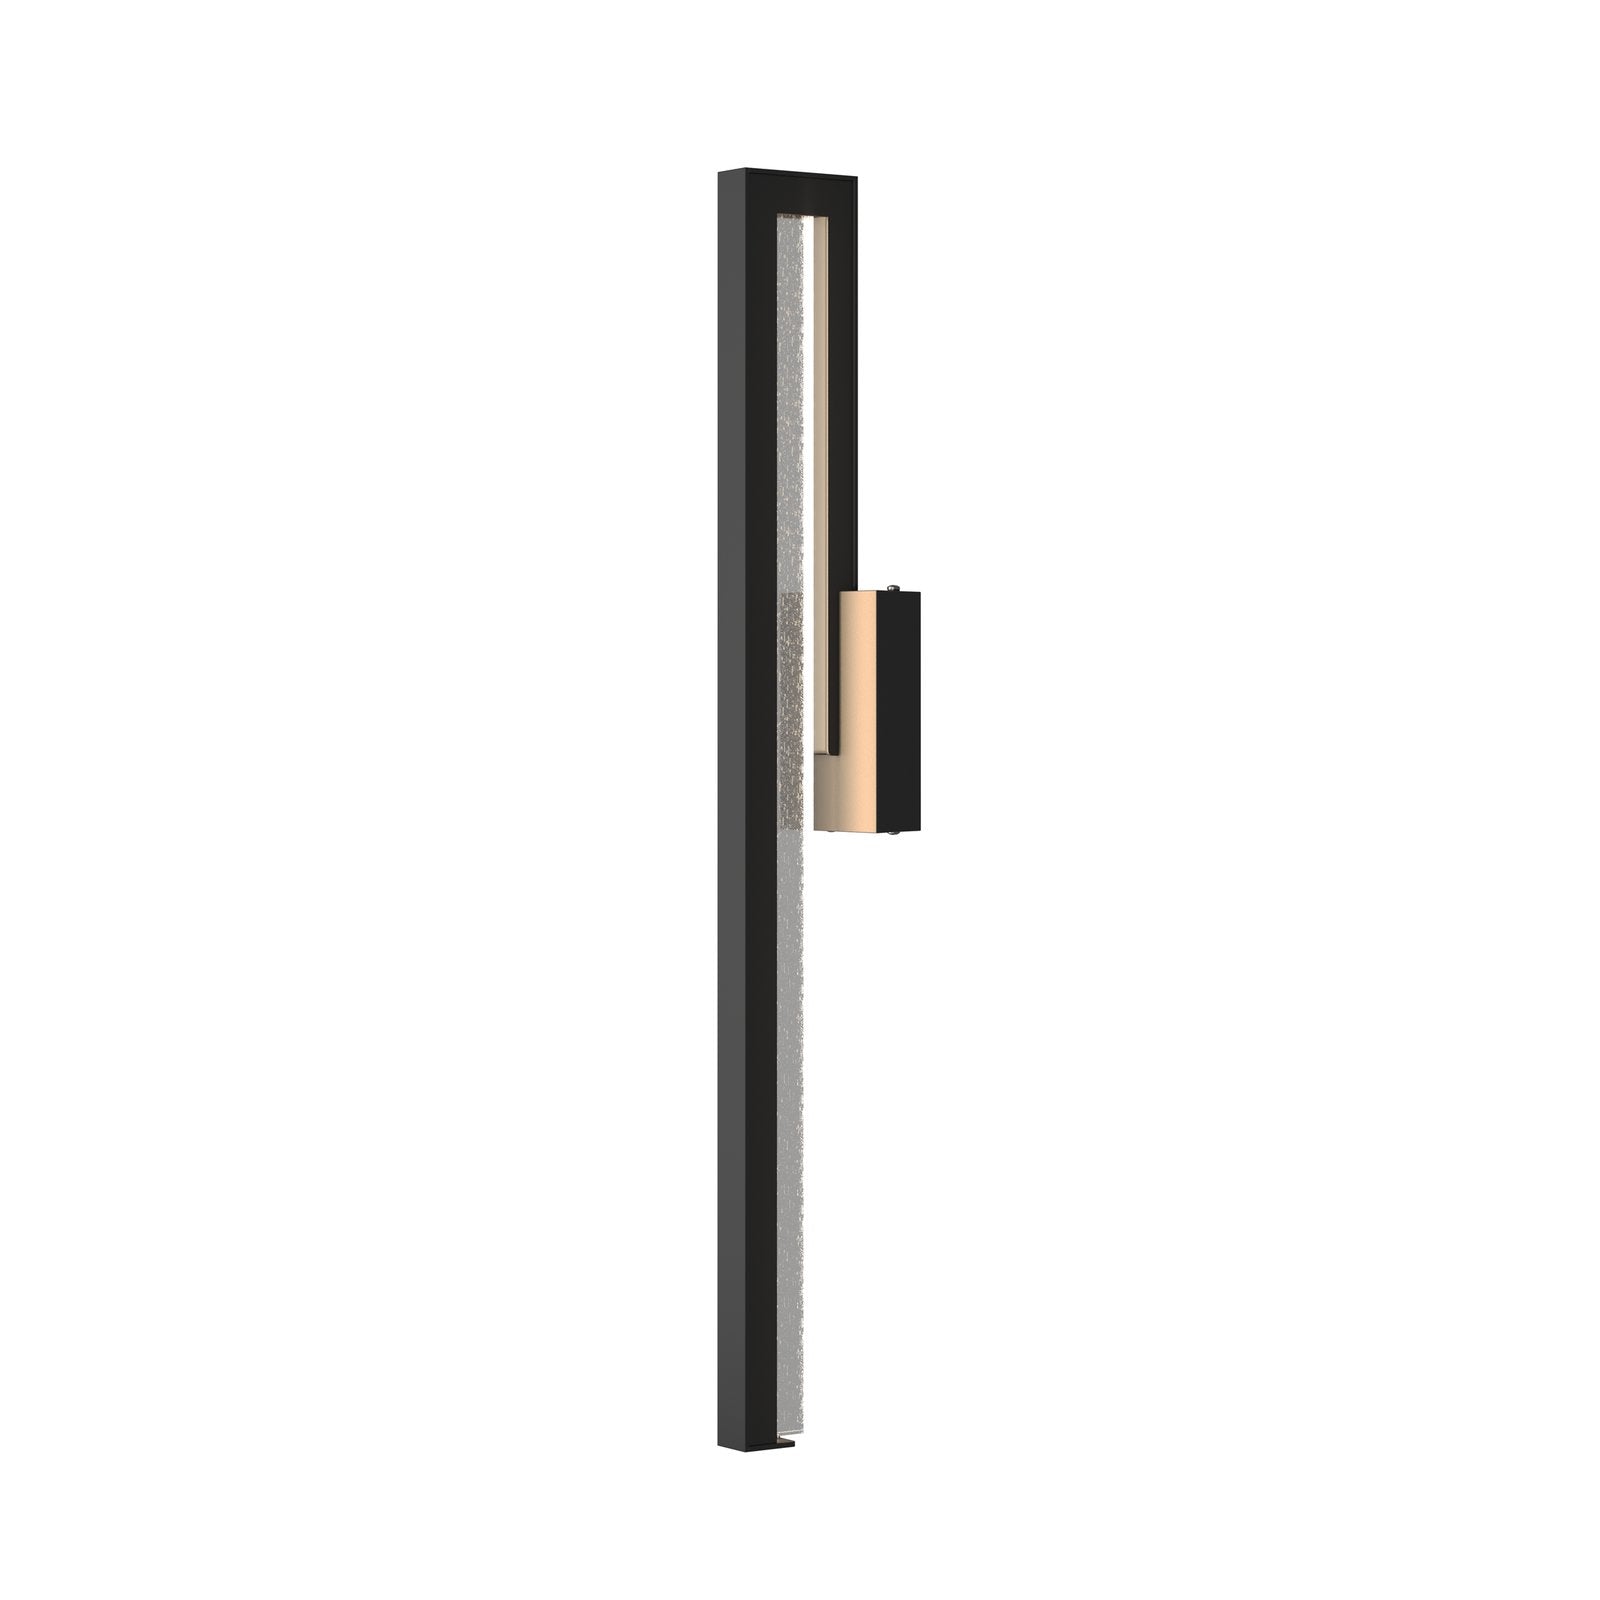 Hubbardton Forge Edge Large LED Outdoor Sconce Outdoor l Wall Hubbardton Forge Coastal Black  